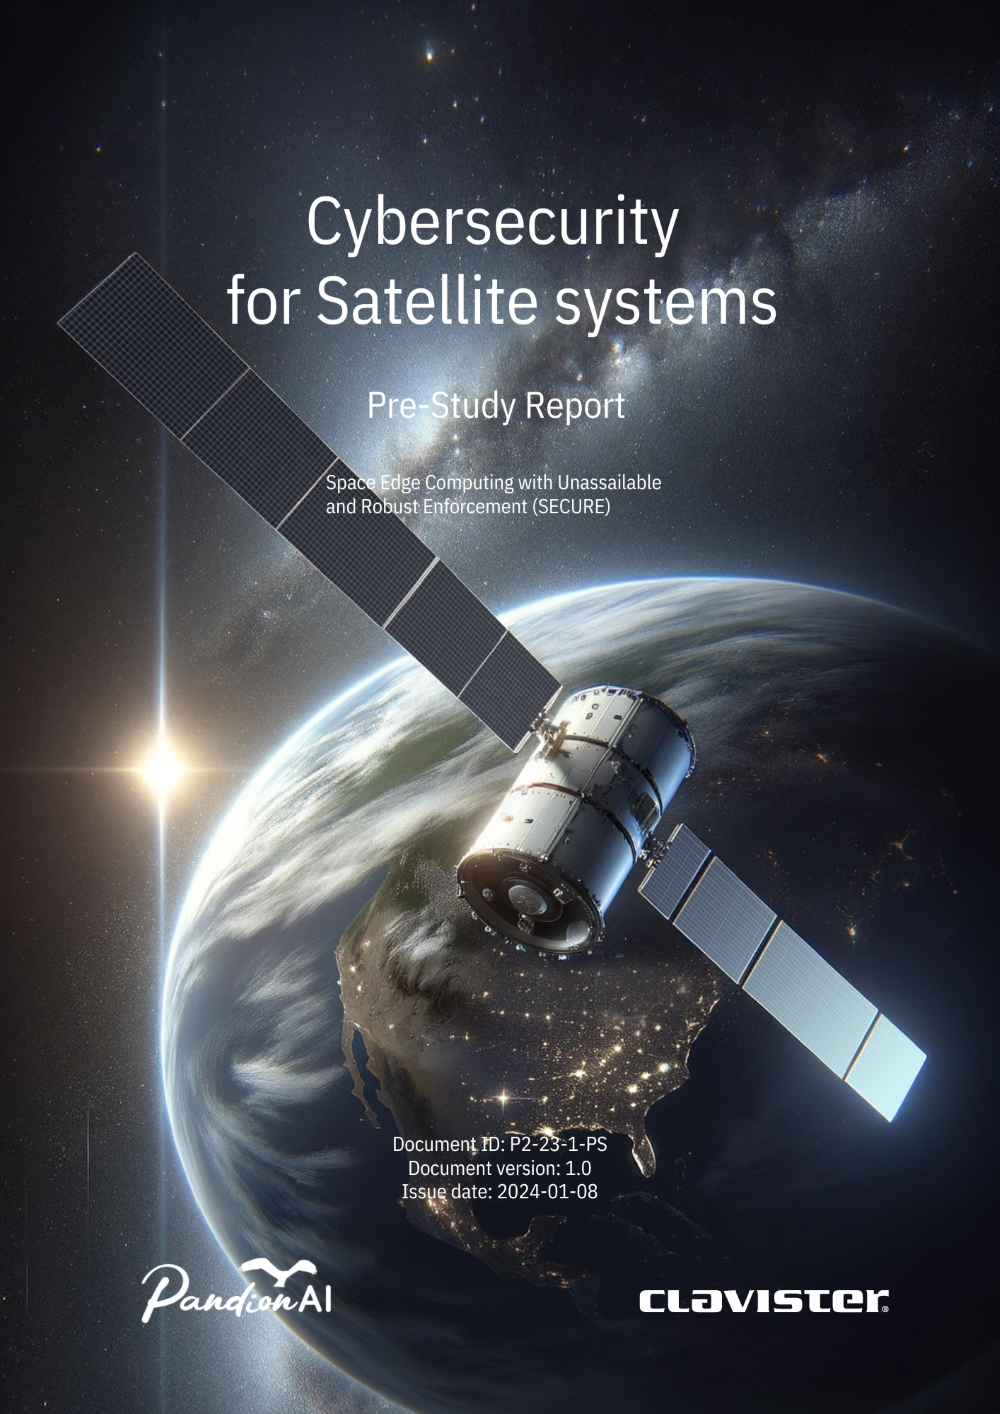 Pre-Study Report, Cybersecurity for Satellite systems